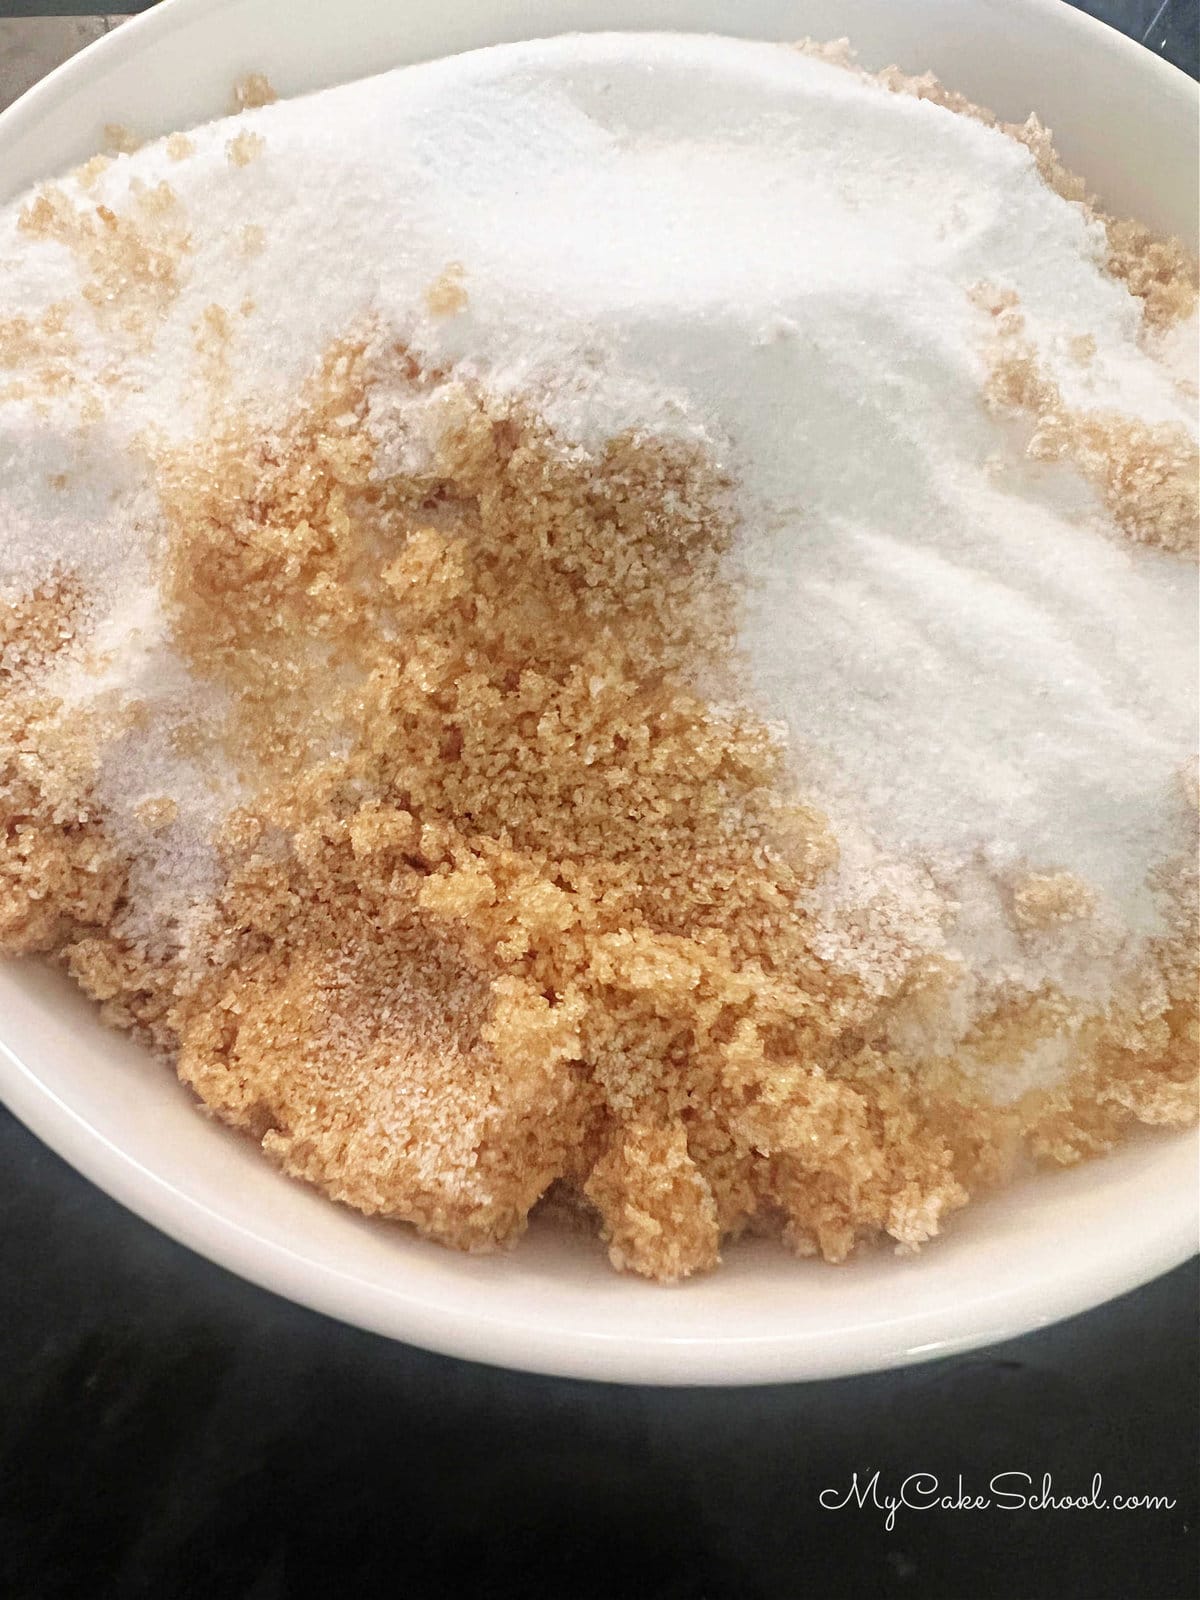 Bowl of Brown and White Sugar